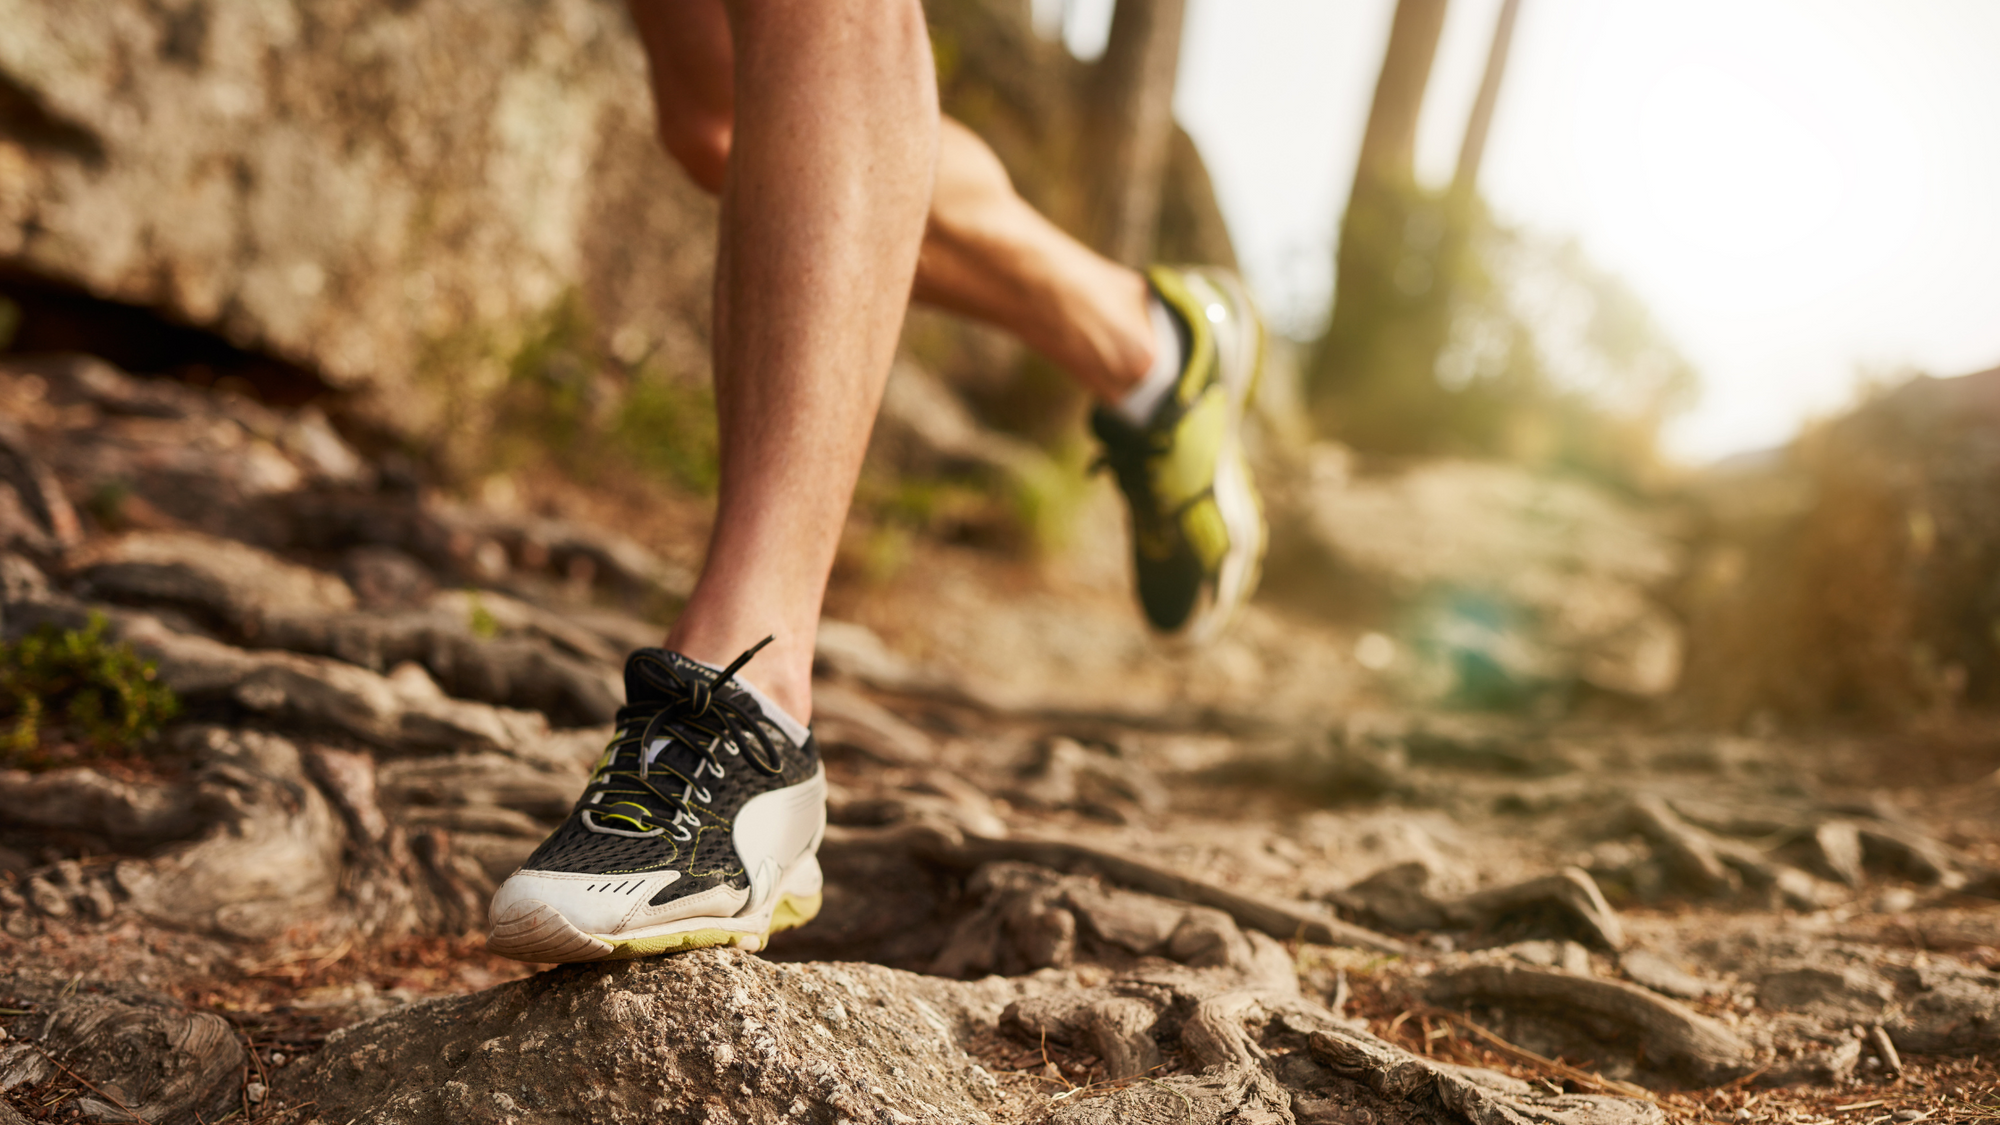 Running shoe categories: The 4 main categories of running shoes